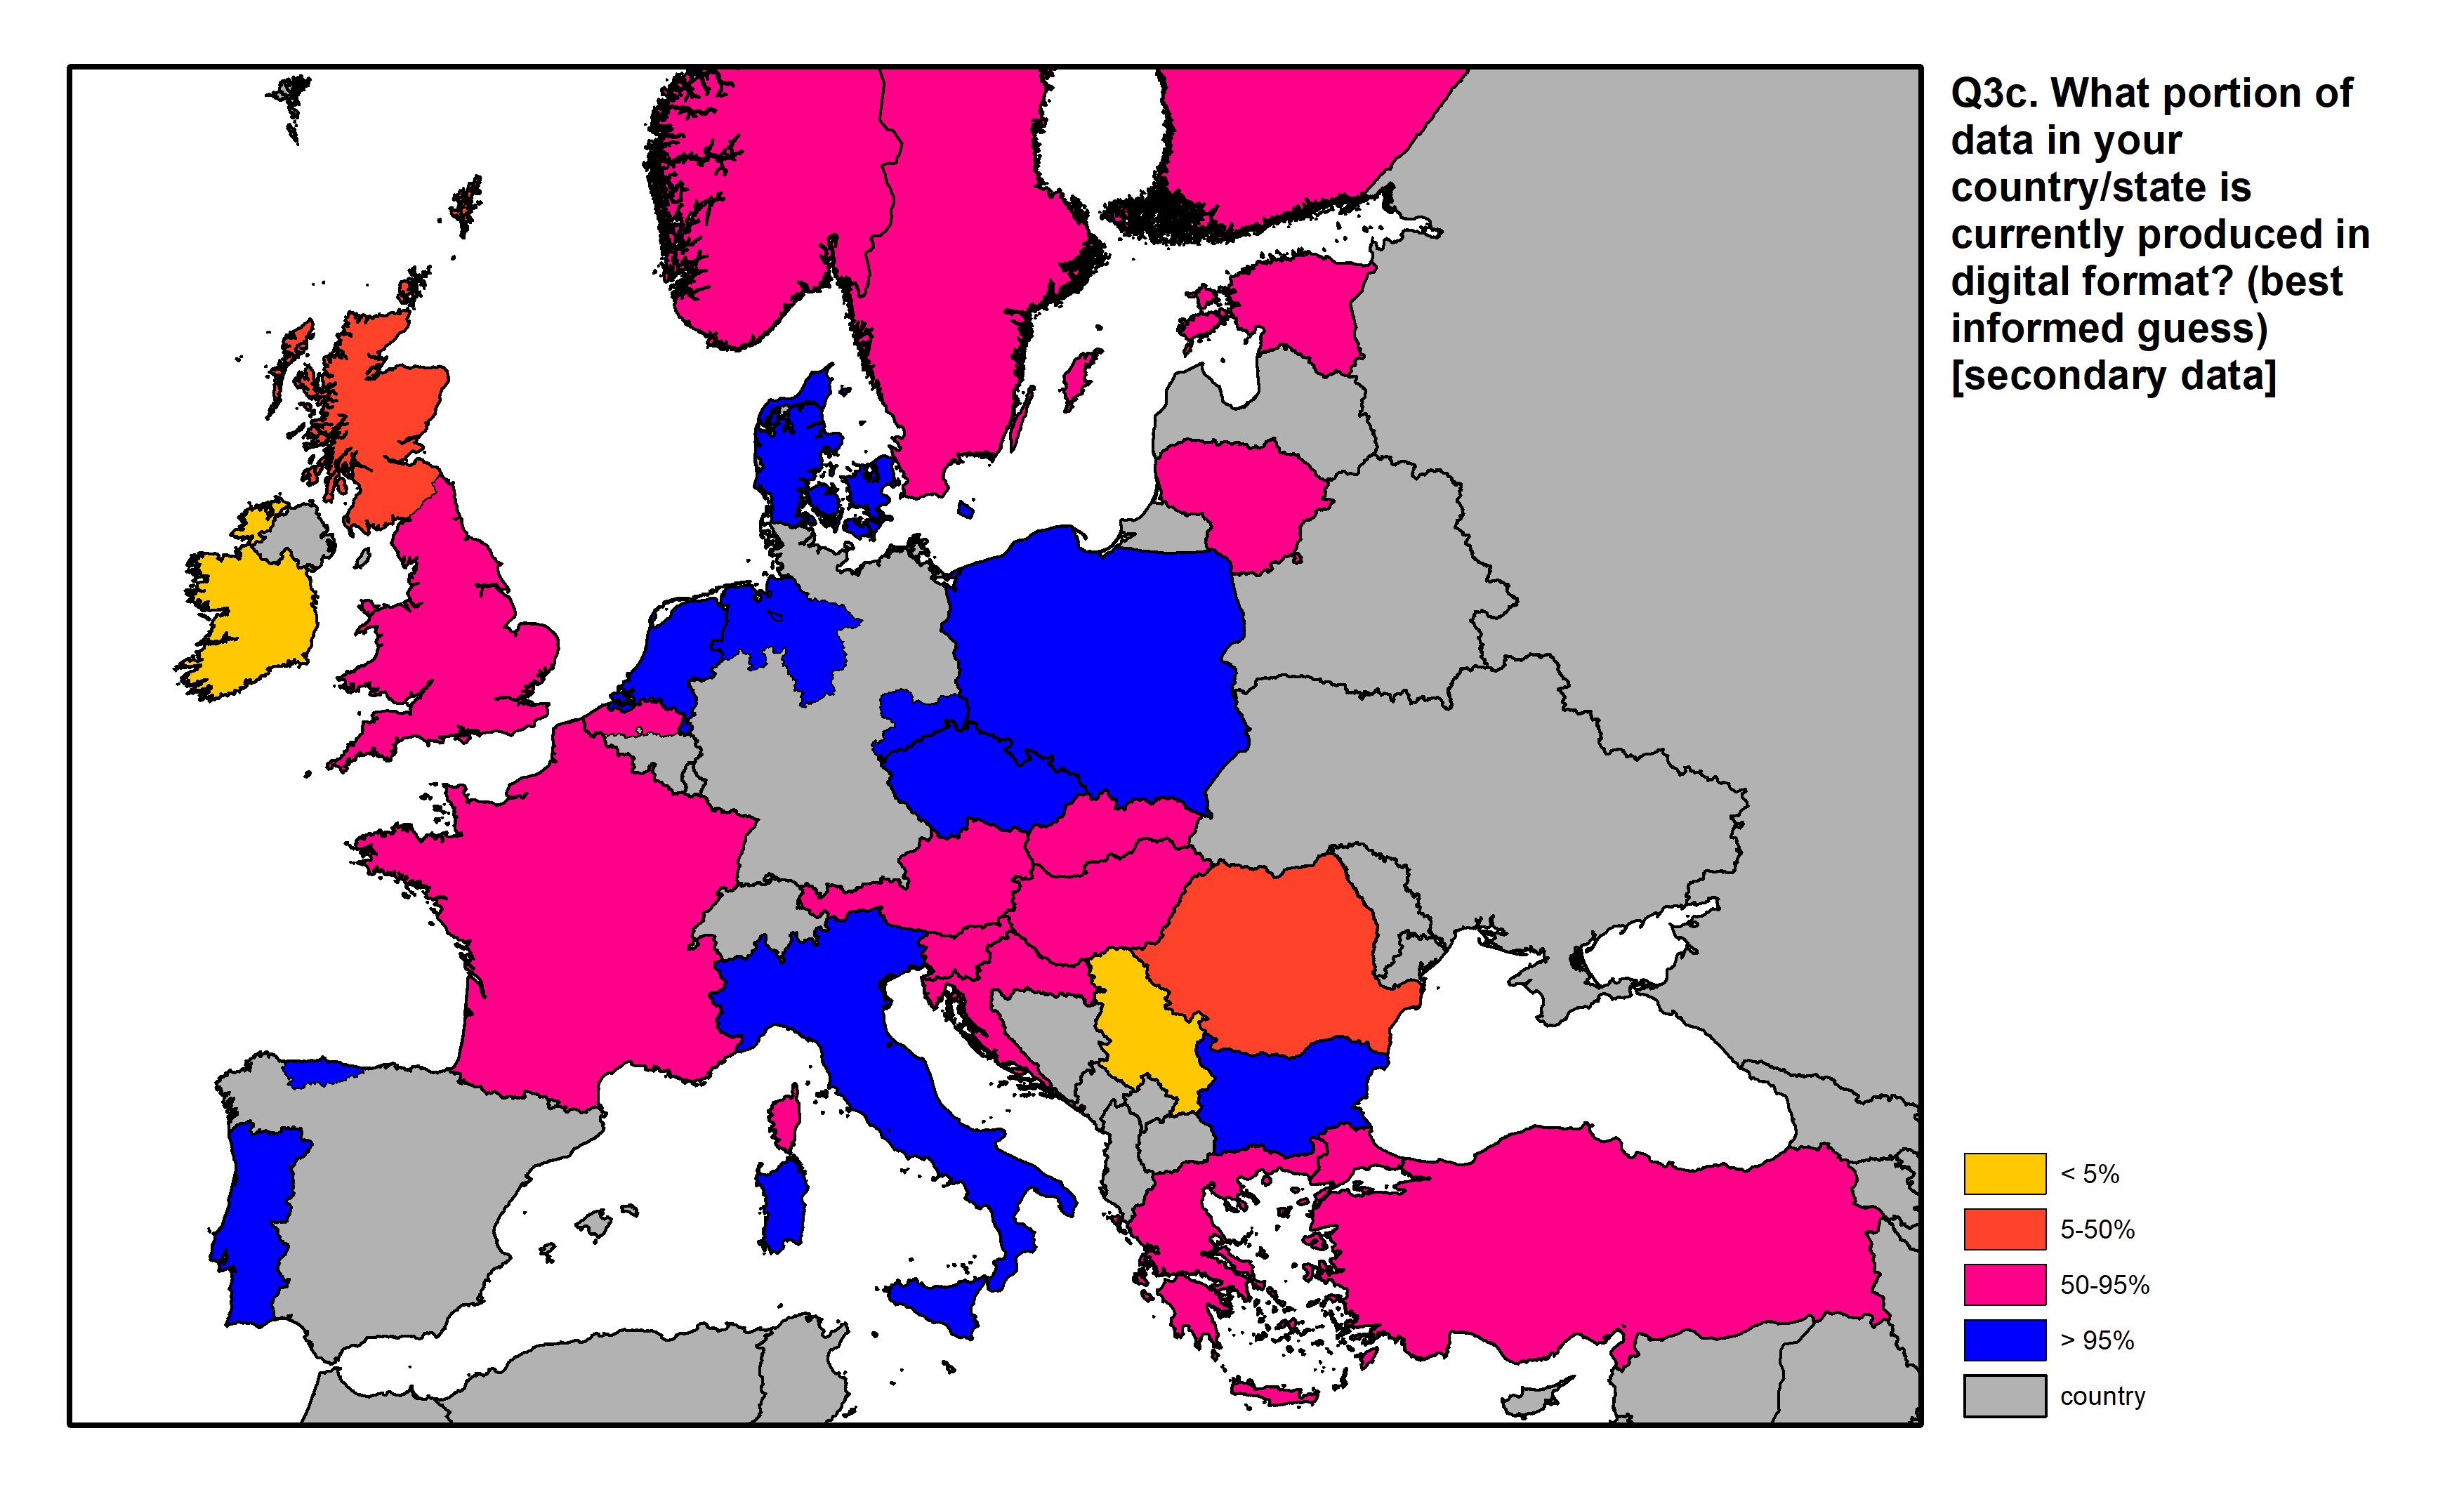 Figure 10: a map of Europe showing countries and regions in colour based on response rates to the survey question.